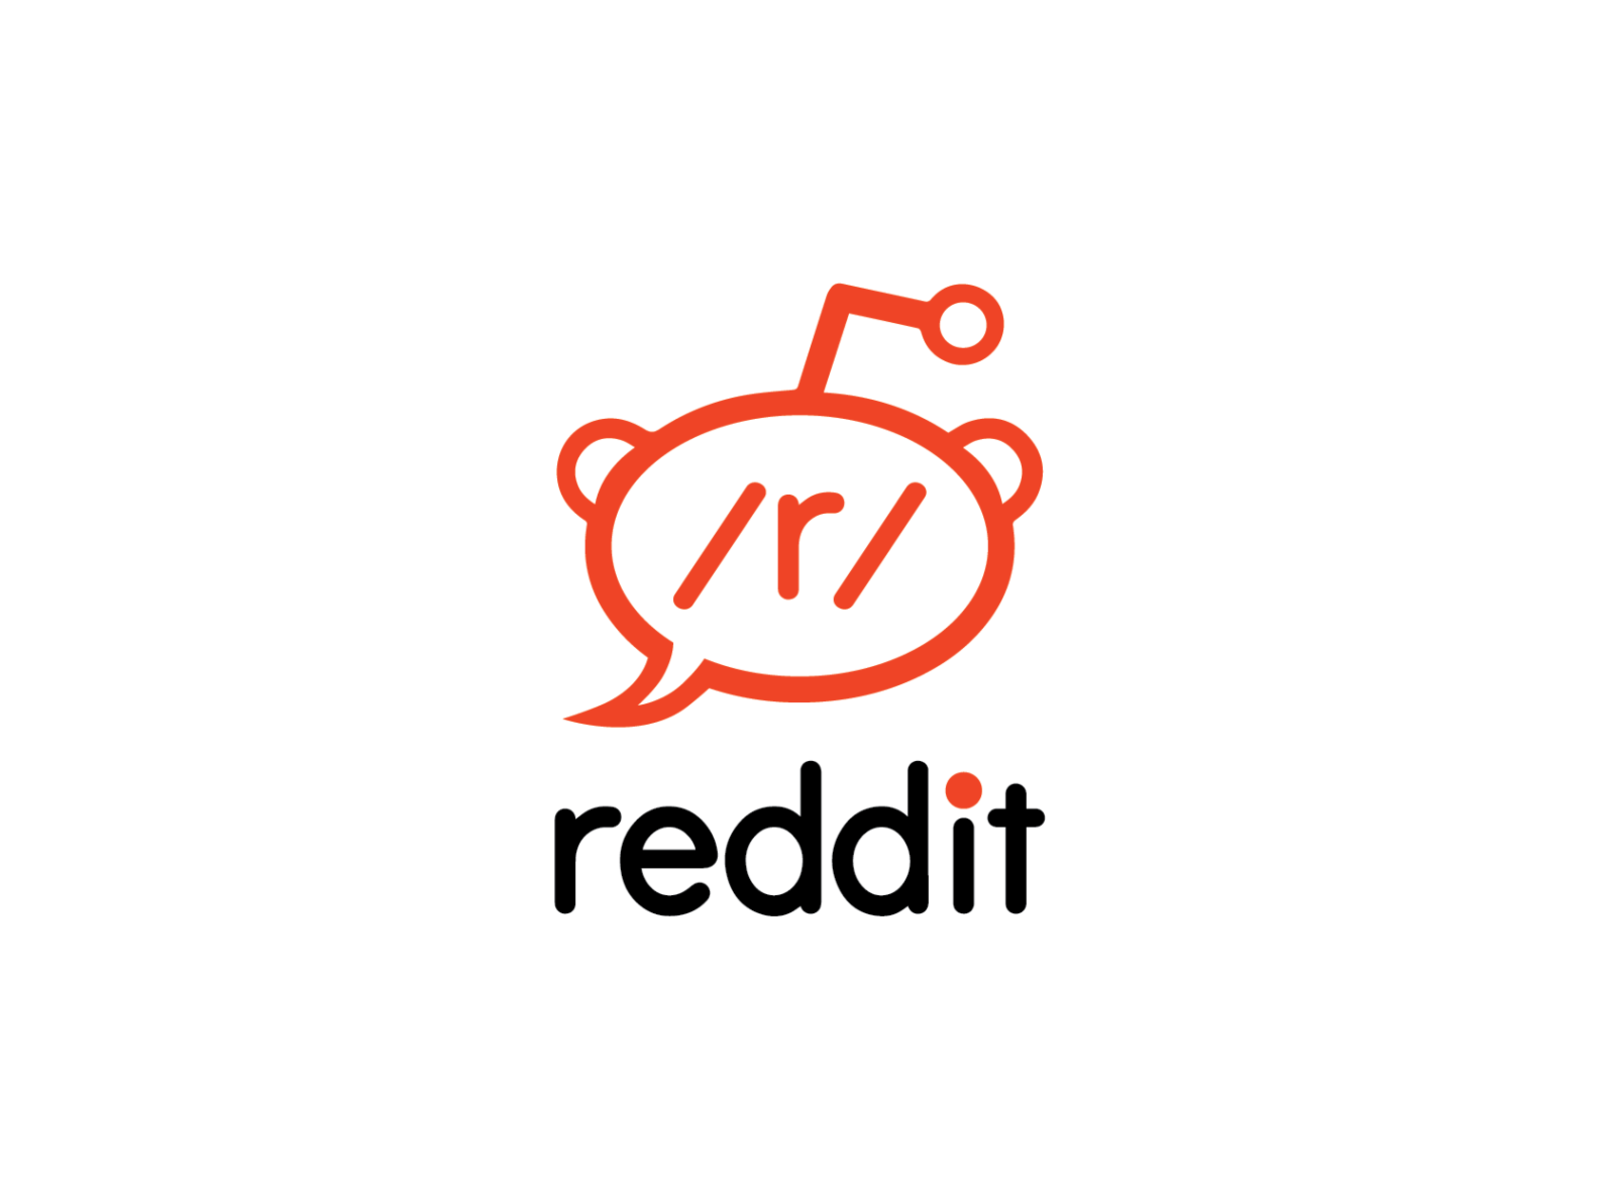 Reddit | Redesign Concept by Anthey Chan on Dribbble